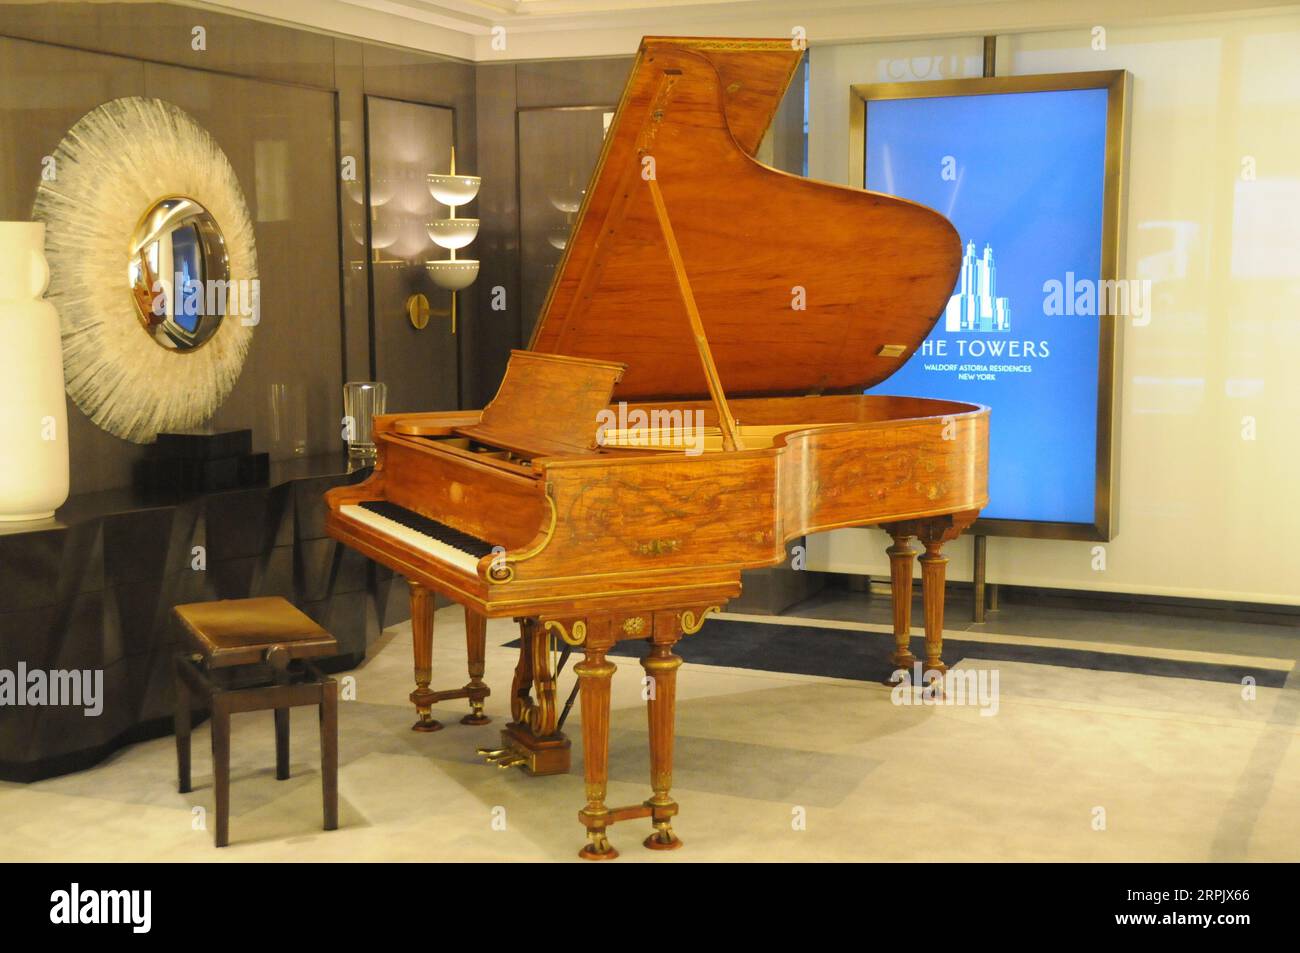 191221 -- NEW YORK, Dec. 21, 2019 -- The Cole Porter Piano is displayed after restoration in a showroom of Waldorf Astoria in New York, the United States, Dec. 19, 2019. The historic luxury hotel Waldorf Astoria New York WANY is making huge efforts in preserving its landmarks and artifacts while planning to start the sales of condominium residences in February 2020 and put the hotel back to business in early 2022, according to its management team, sales agent and experts. TO GO WITH Feature: New York s iconic Waldorf Astoria to offer residents ownership for 1st time  U.S.-NEW YORK-WALDORF ASTO Stock Photo